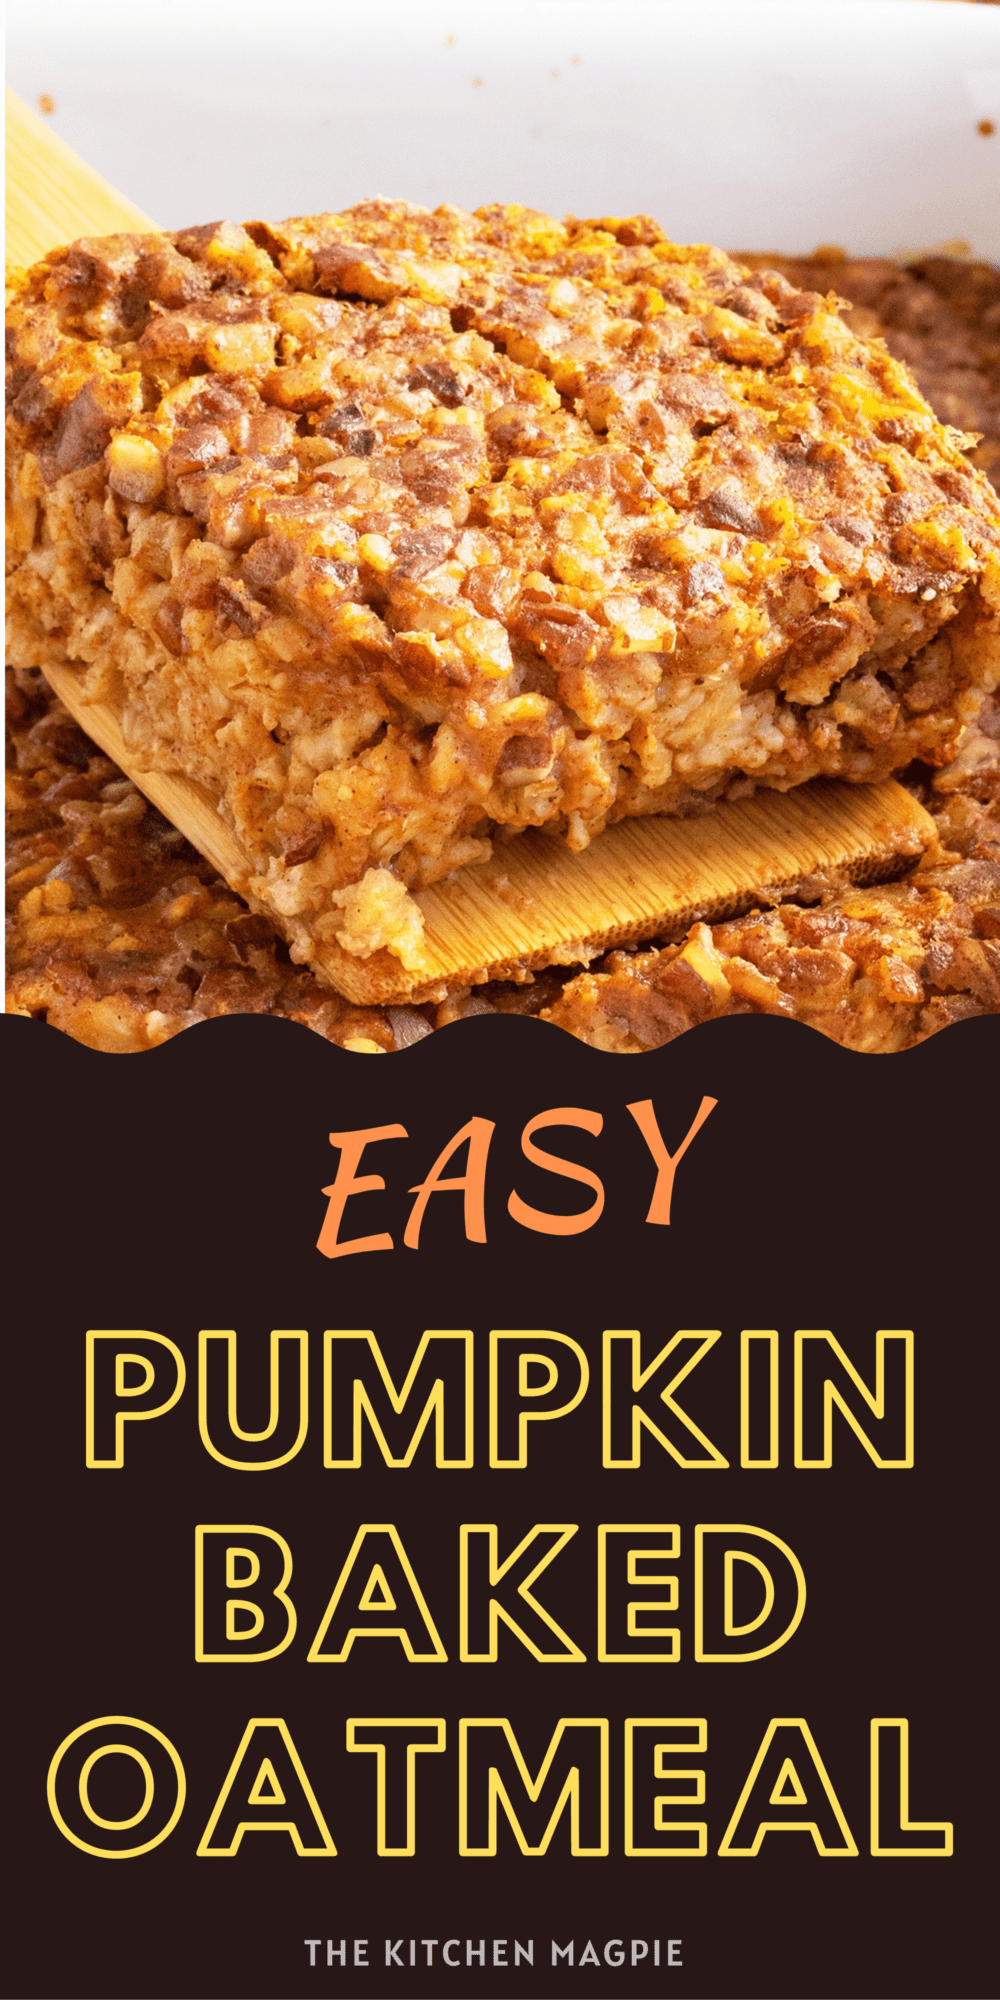 This pumpkin baked oatmeal is a great start to the day with a great pumpkin flavor and hearty oatmeal to keep you full.